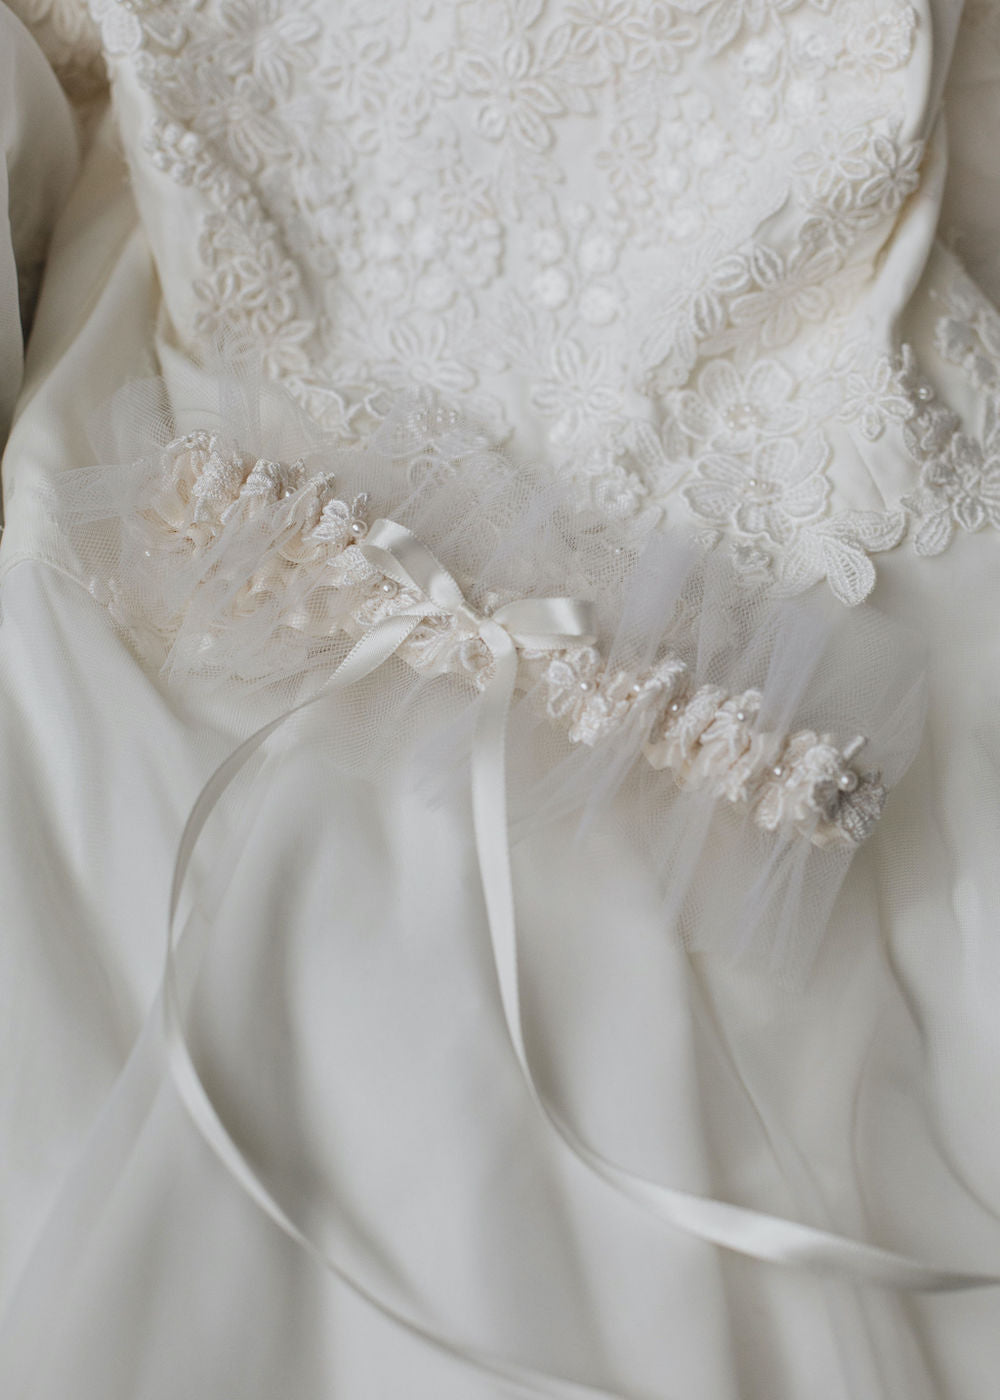 how to use your mom's wedding dress with custom wedding garter and personzlied handkerchiefs by expert bridal heirloom designer, The Garter Girl